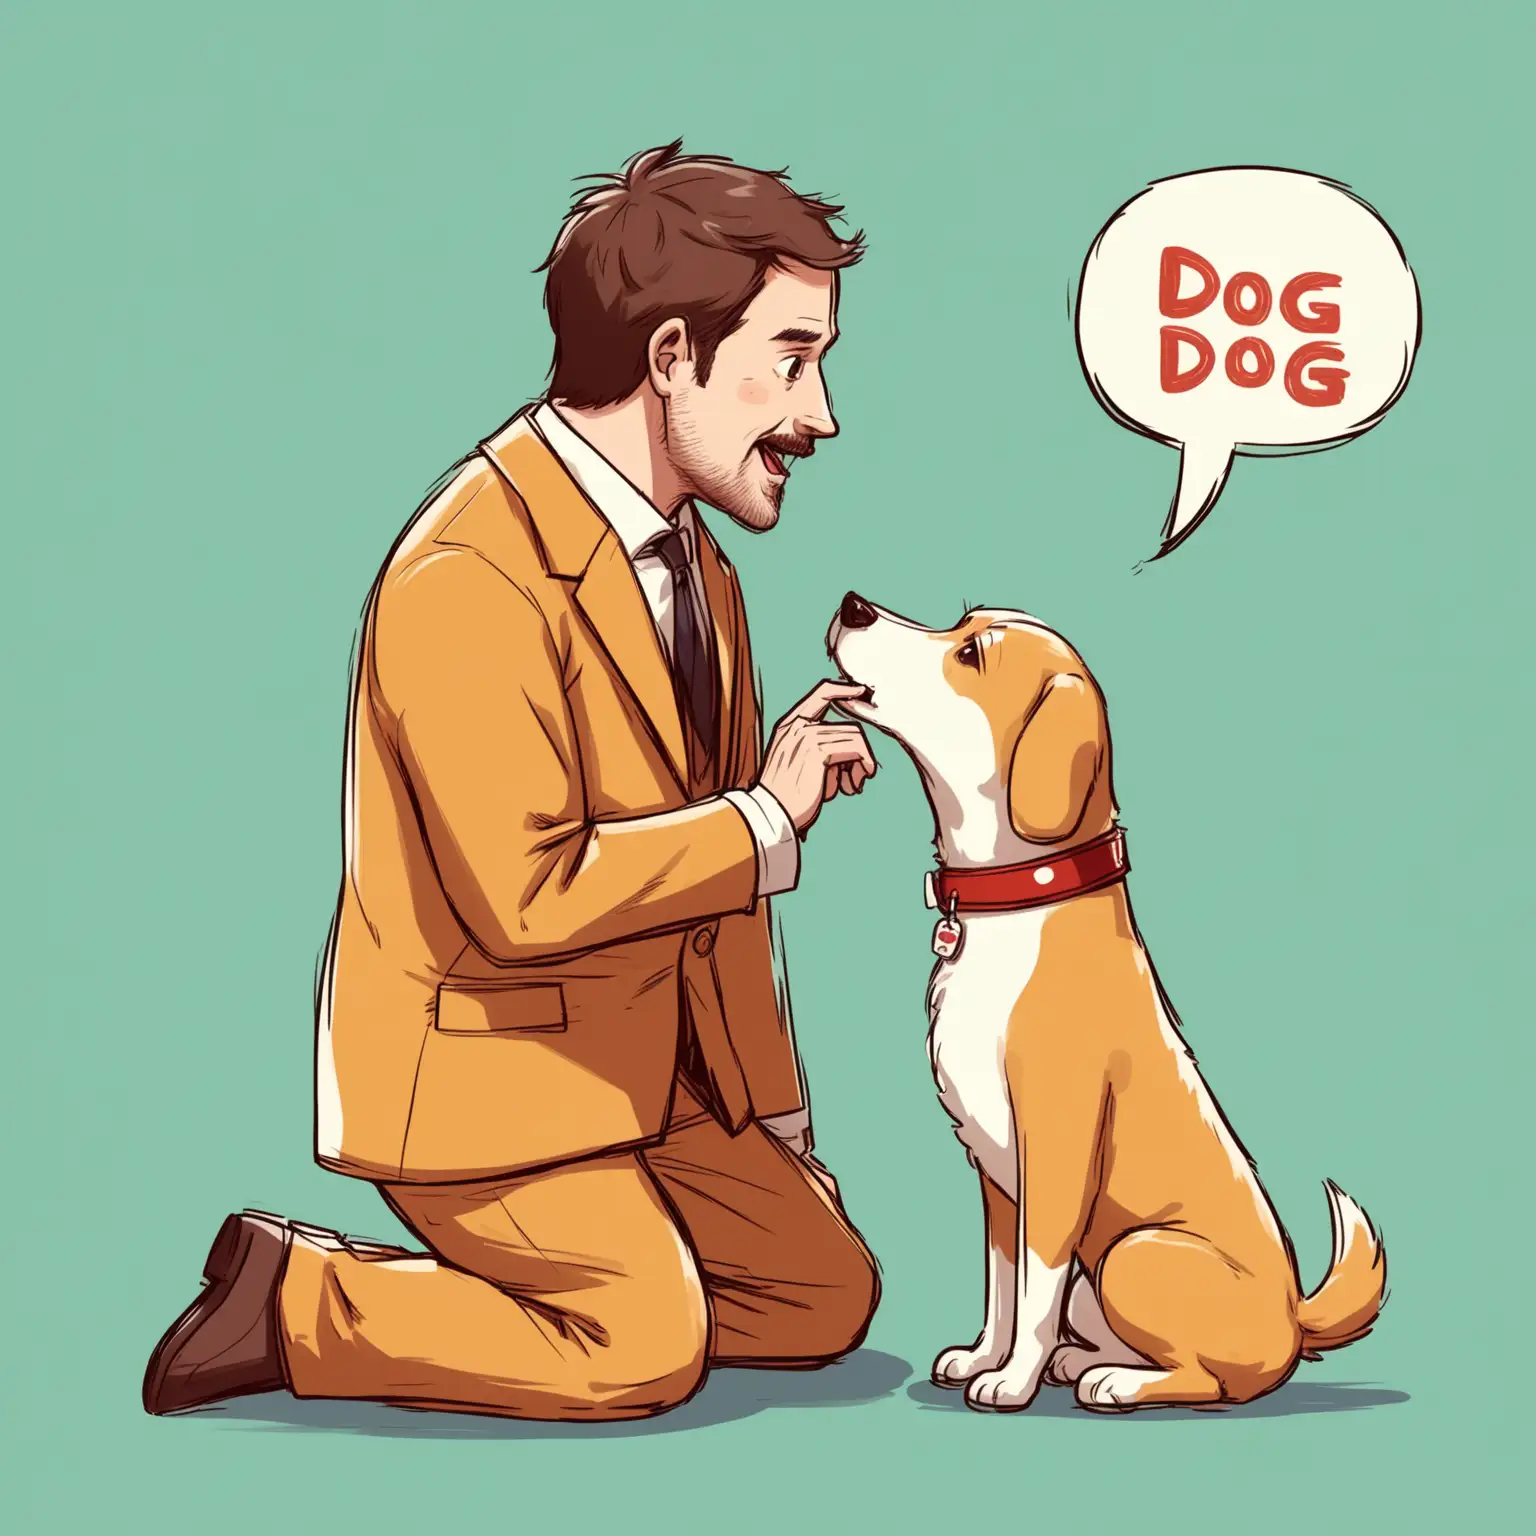 Whimsical Illustration Man in Dog Costume Conversing with Real Dog